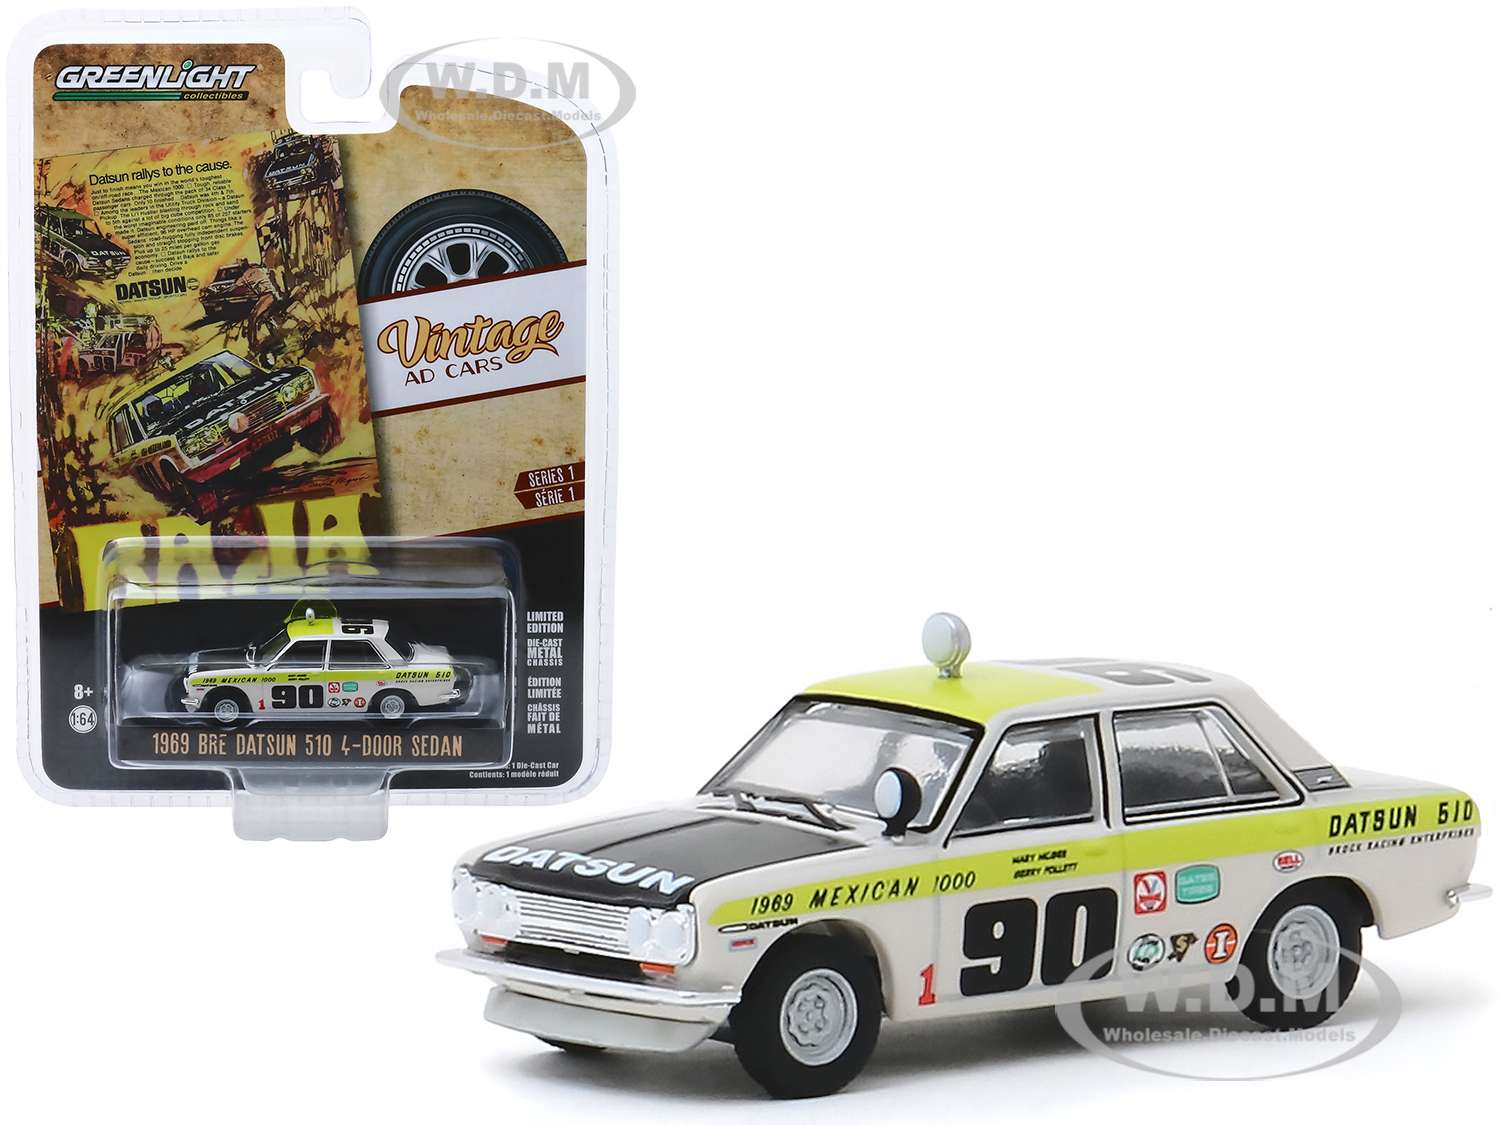 1969 Datsun 510 4-door Sedan 90 "1969 Mexican 1000" "datsun Rallys To The Cause" "vintage Ad Cars" Series 1 1/64 Diecast Model Car By Greenlight